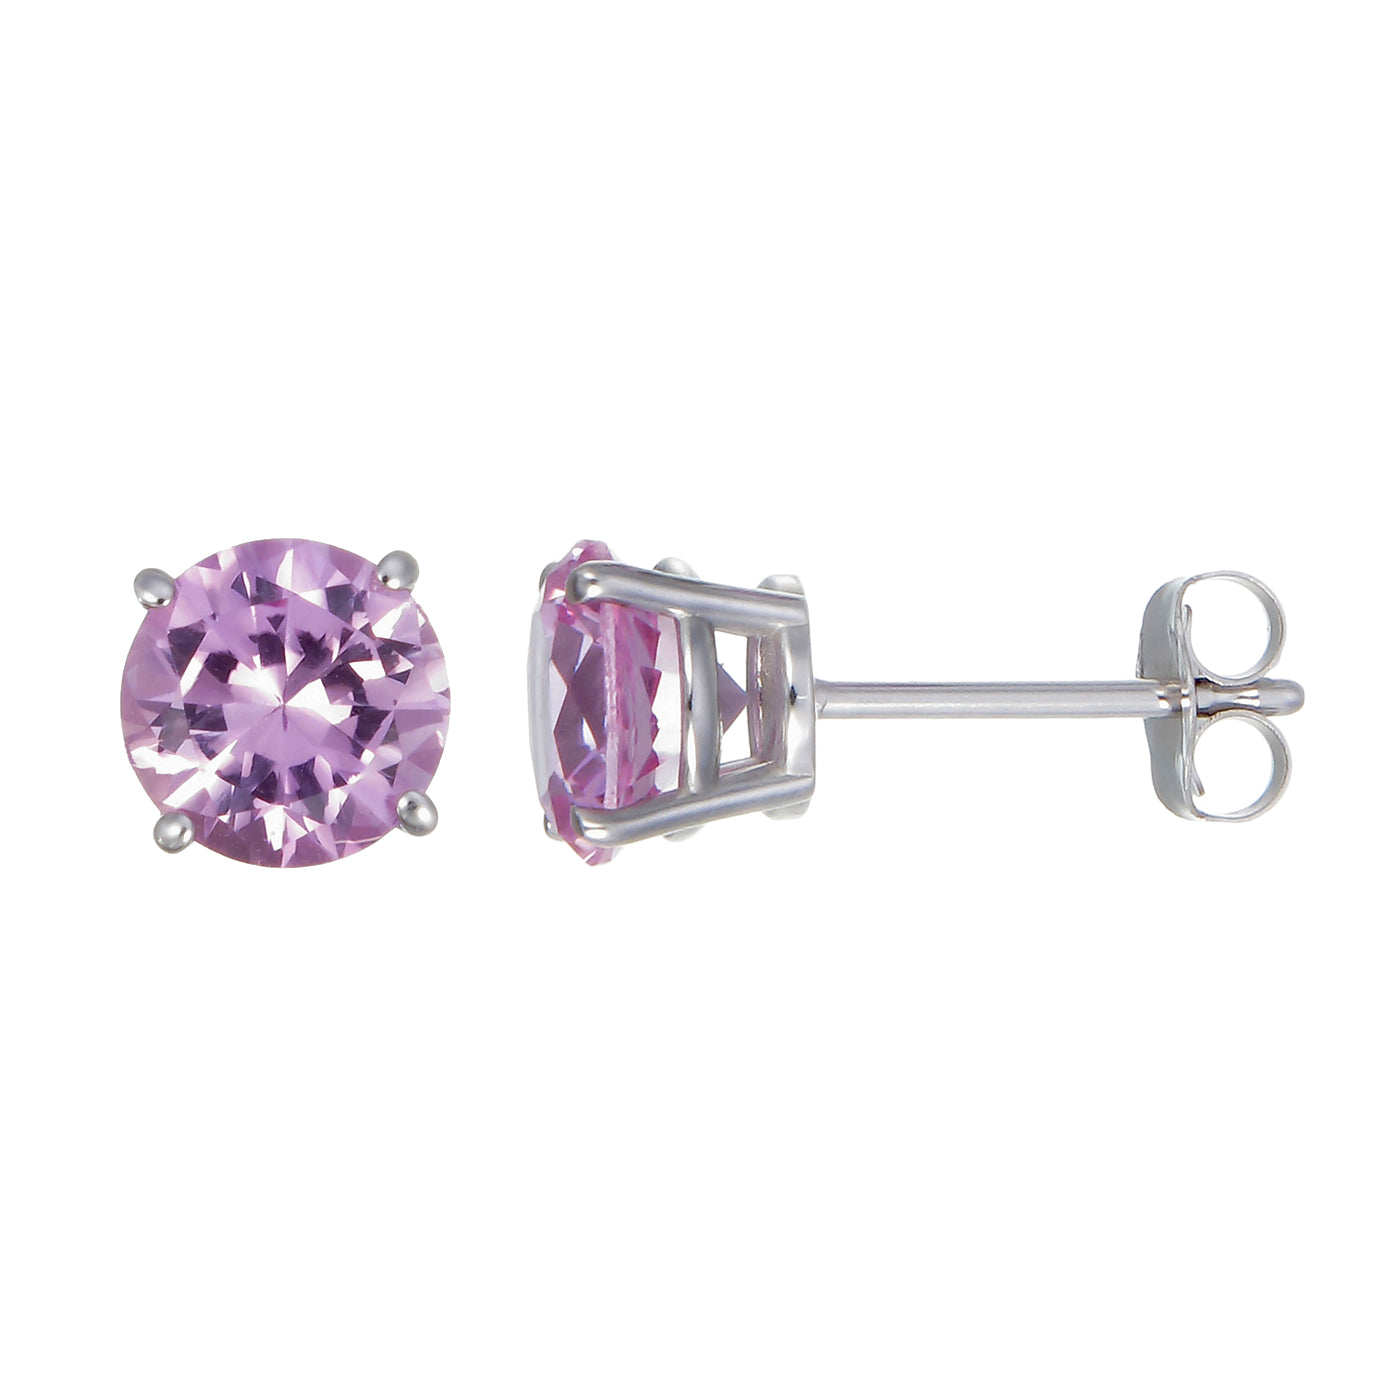 1 cttw Pink Sapphire Stud Earrings 14K Gold Round with Push Backs